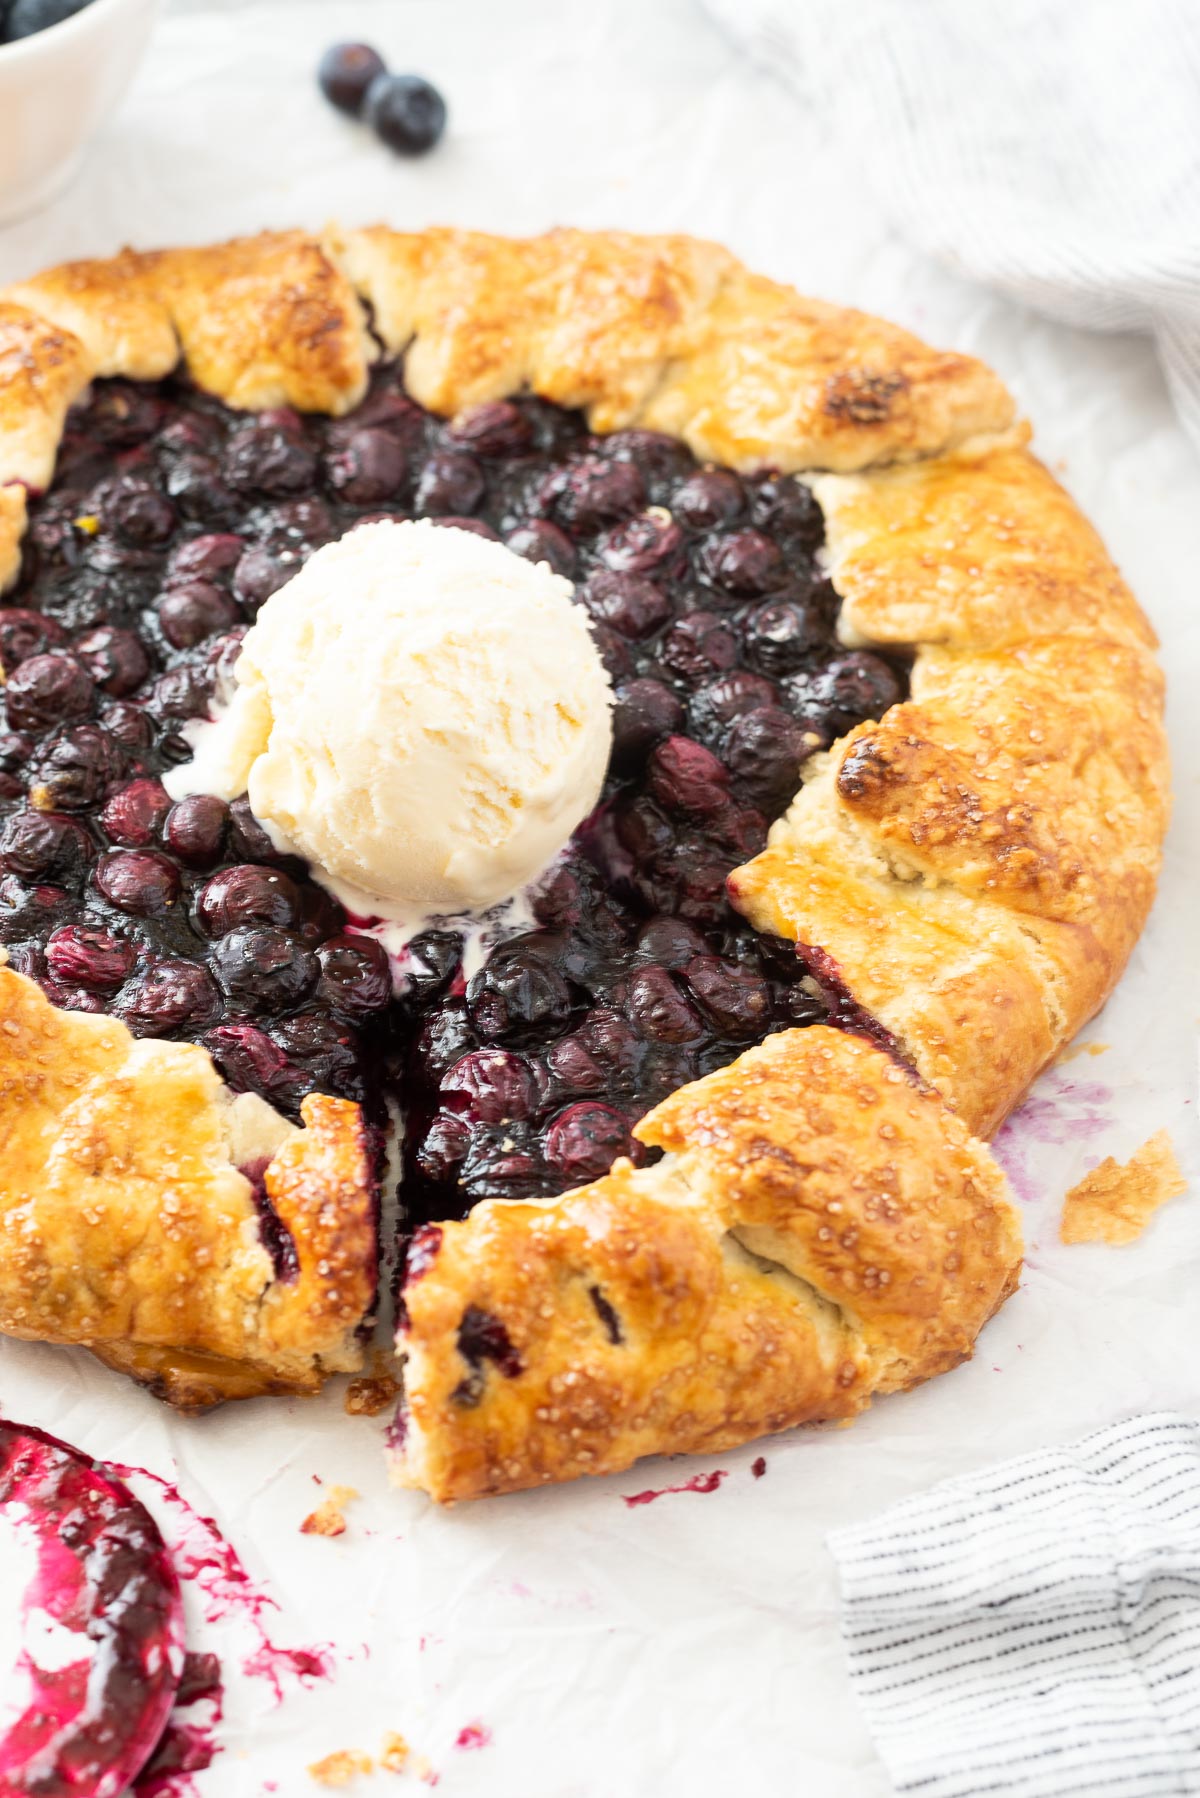 Blueberry galette with slice cut and ice cream in center